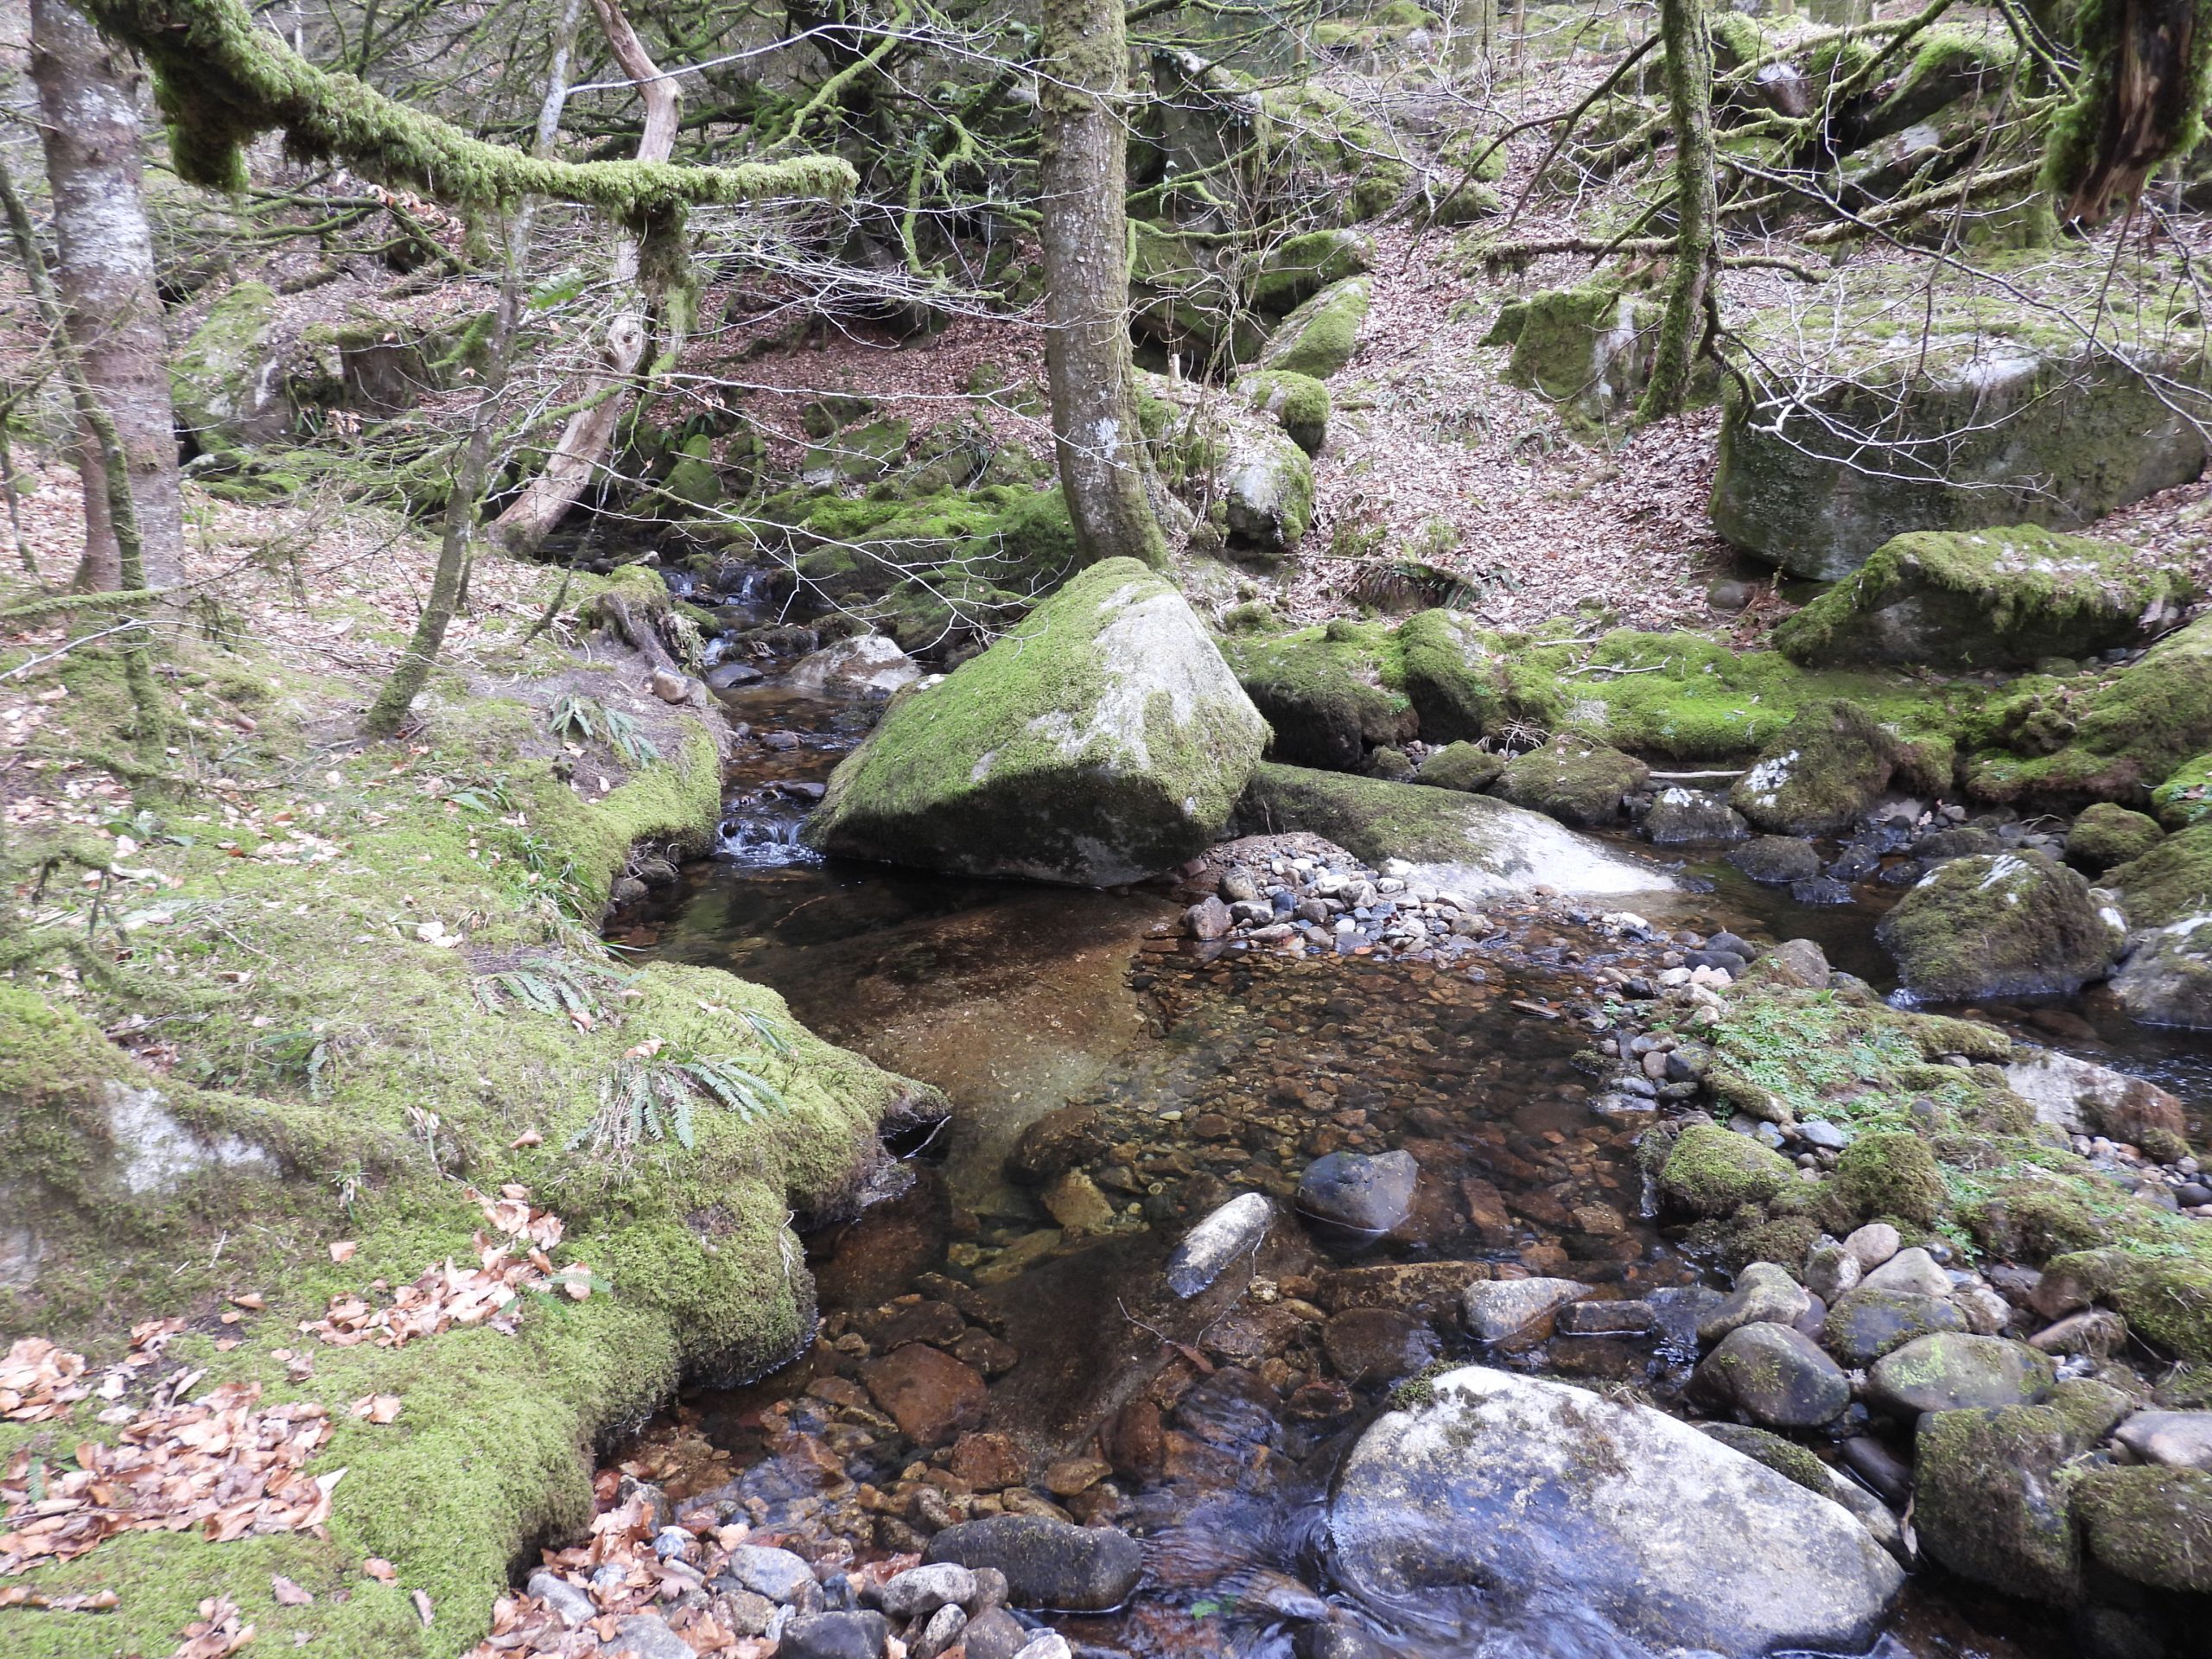 4. River Meavy